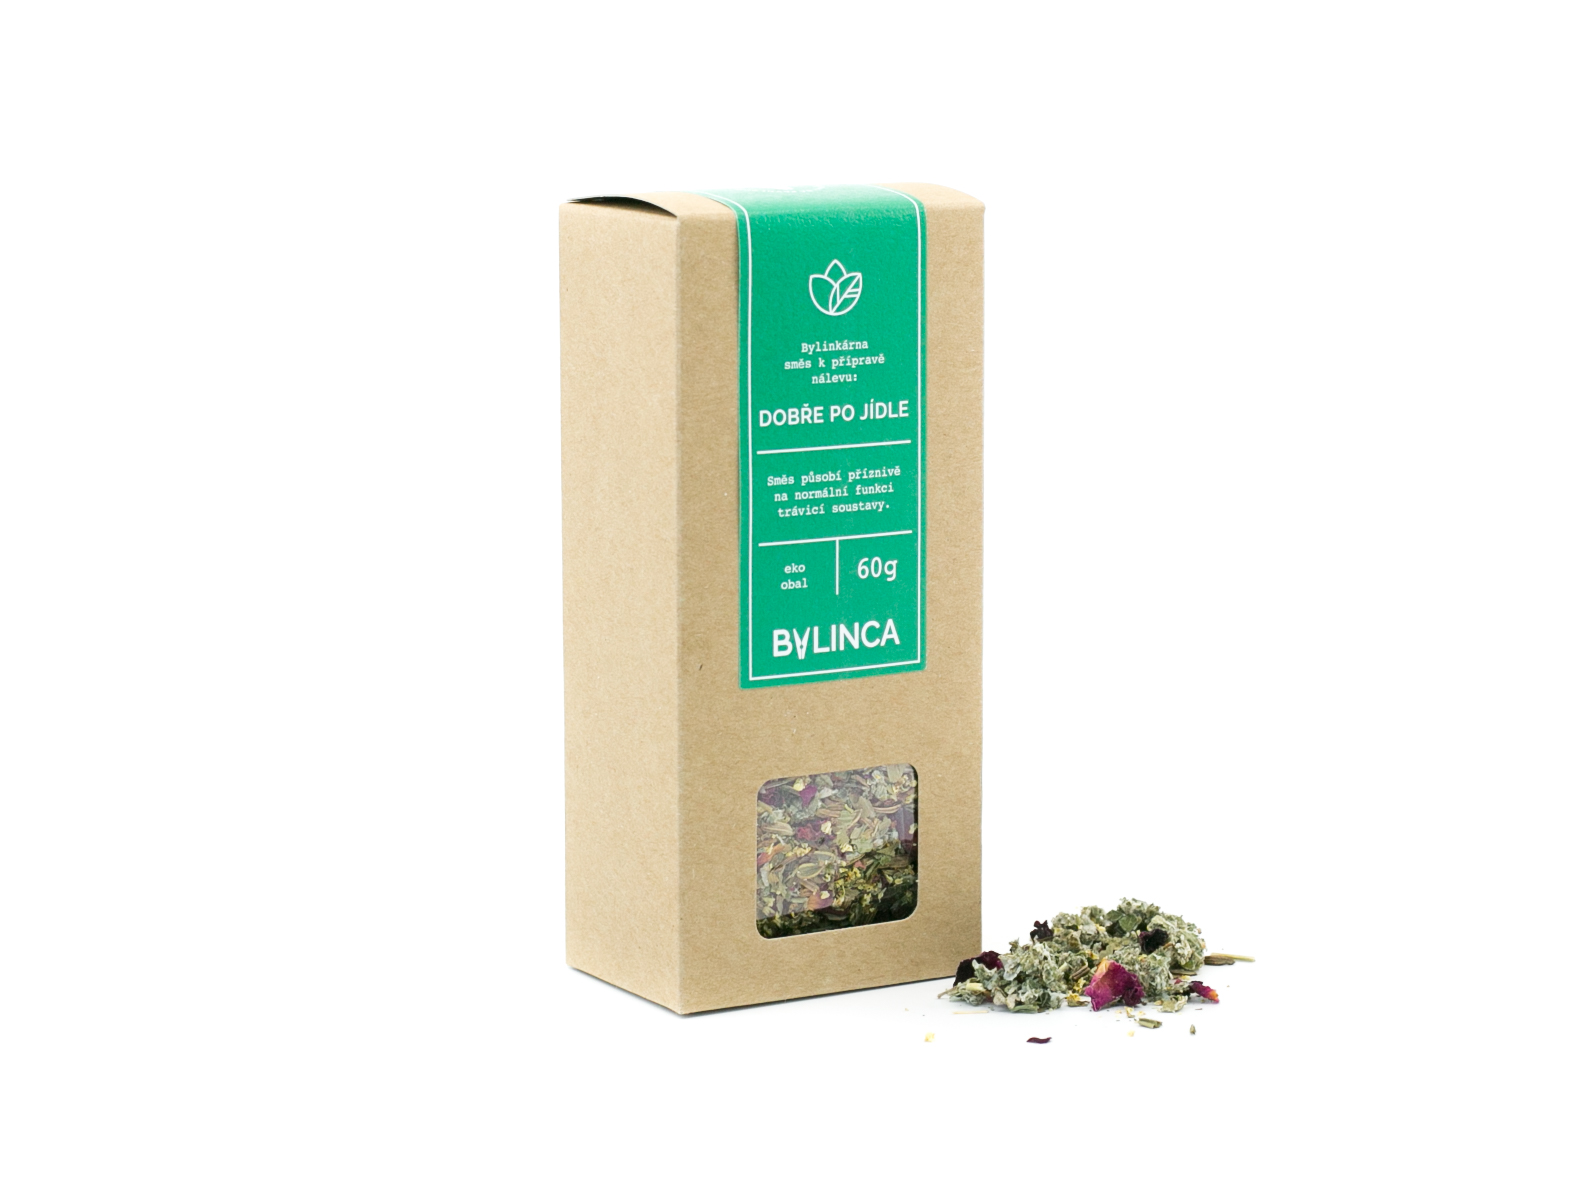 Herbal mixture: Good after a meal 60g